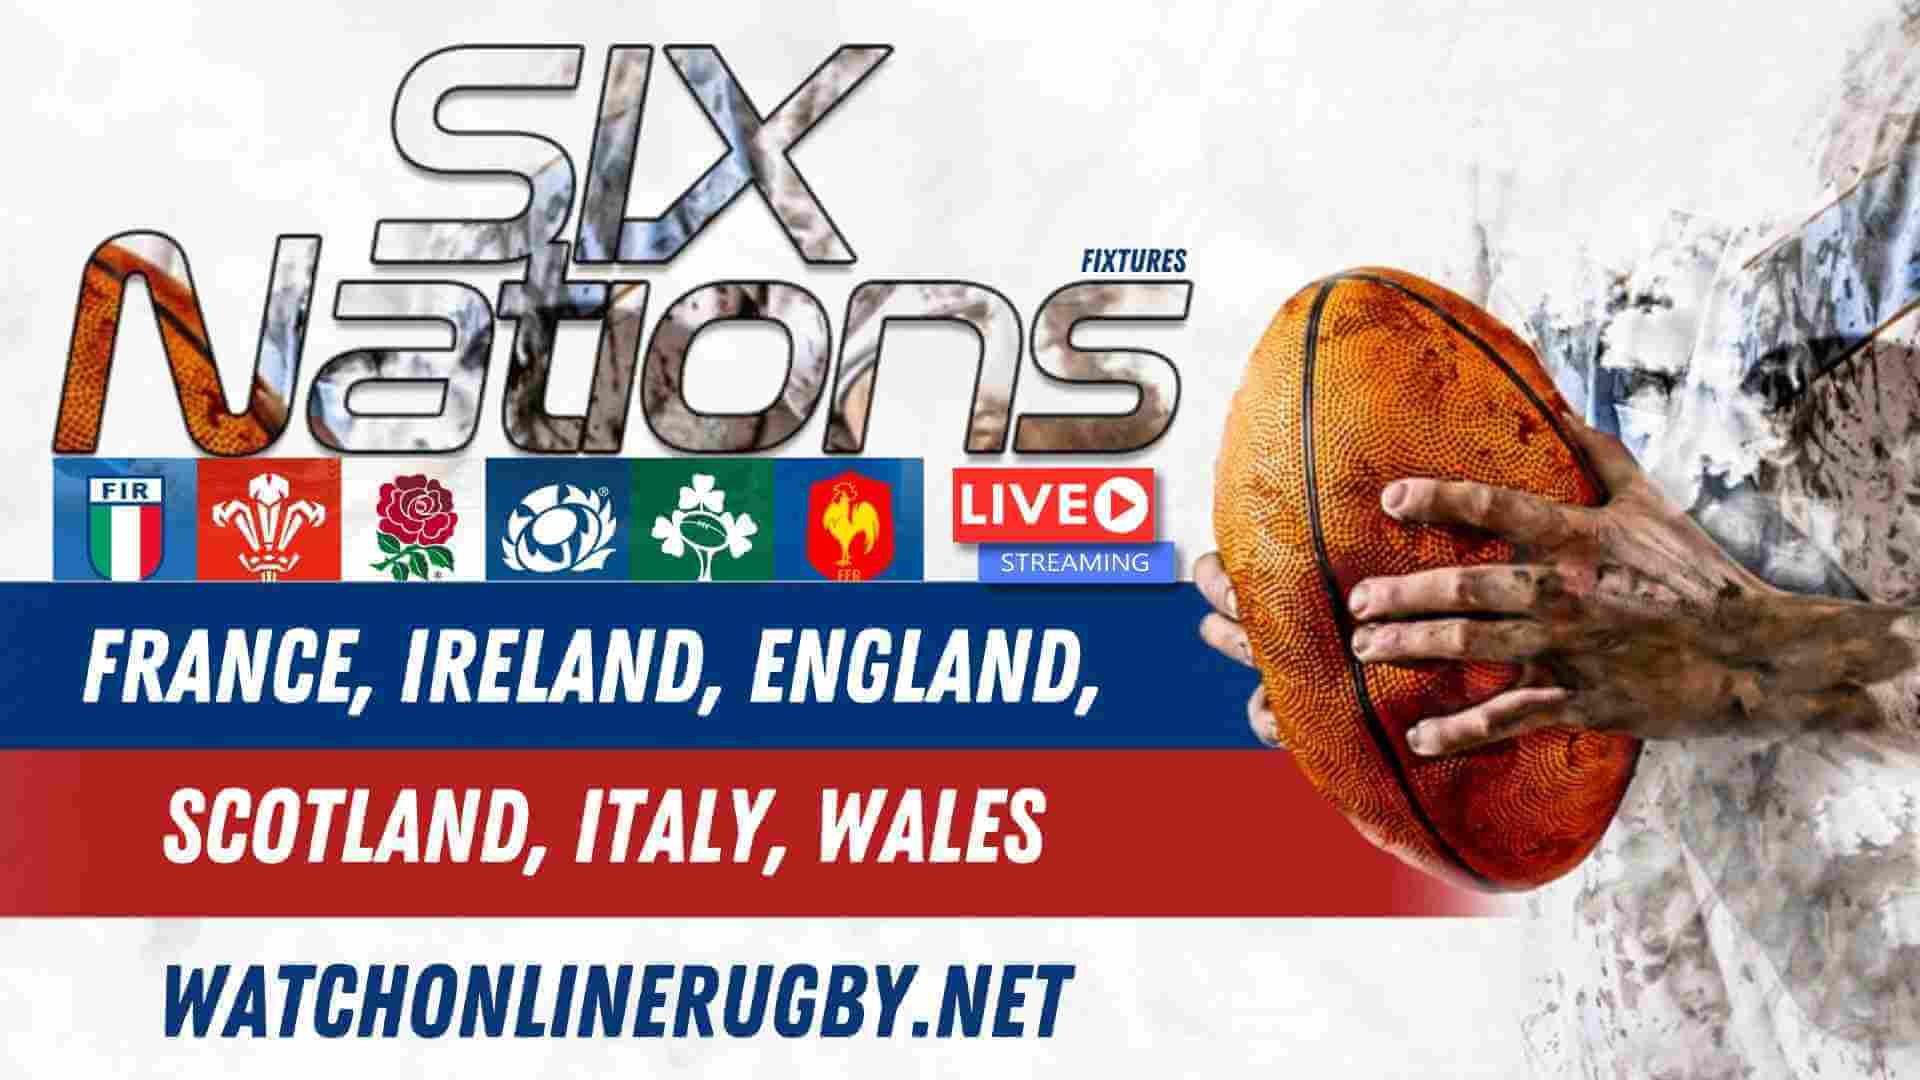 2017 Six Nations Rugby Schedule